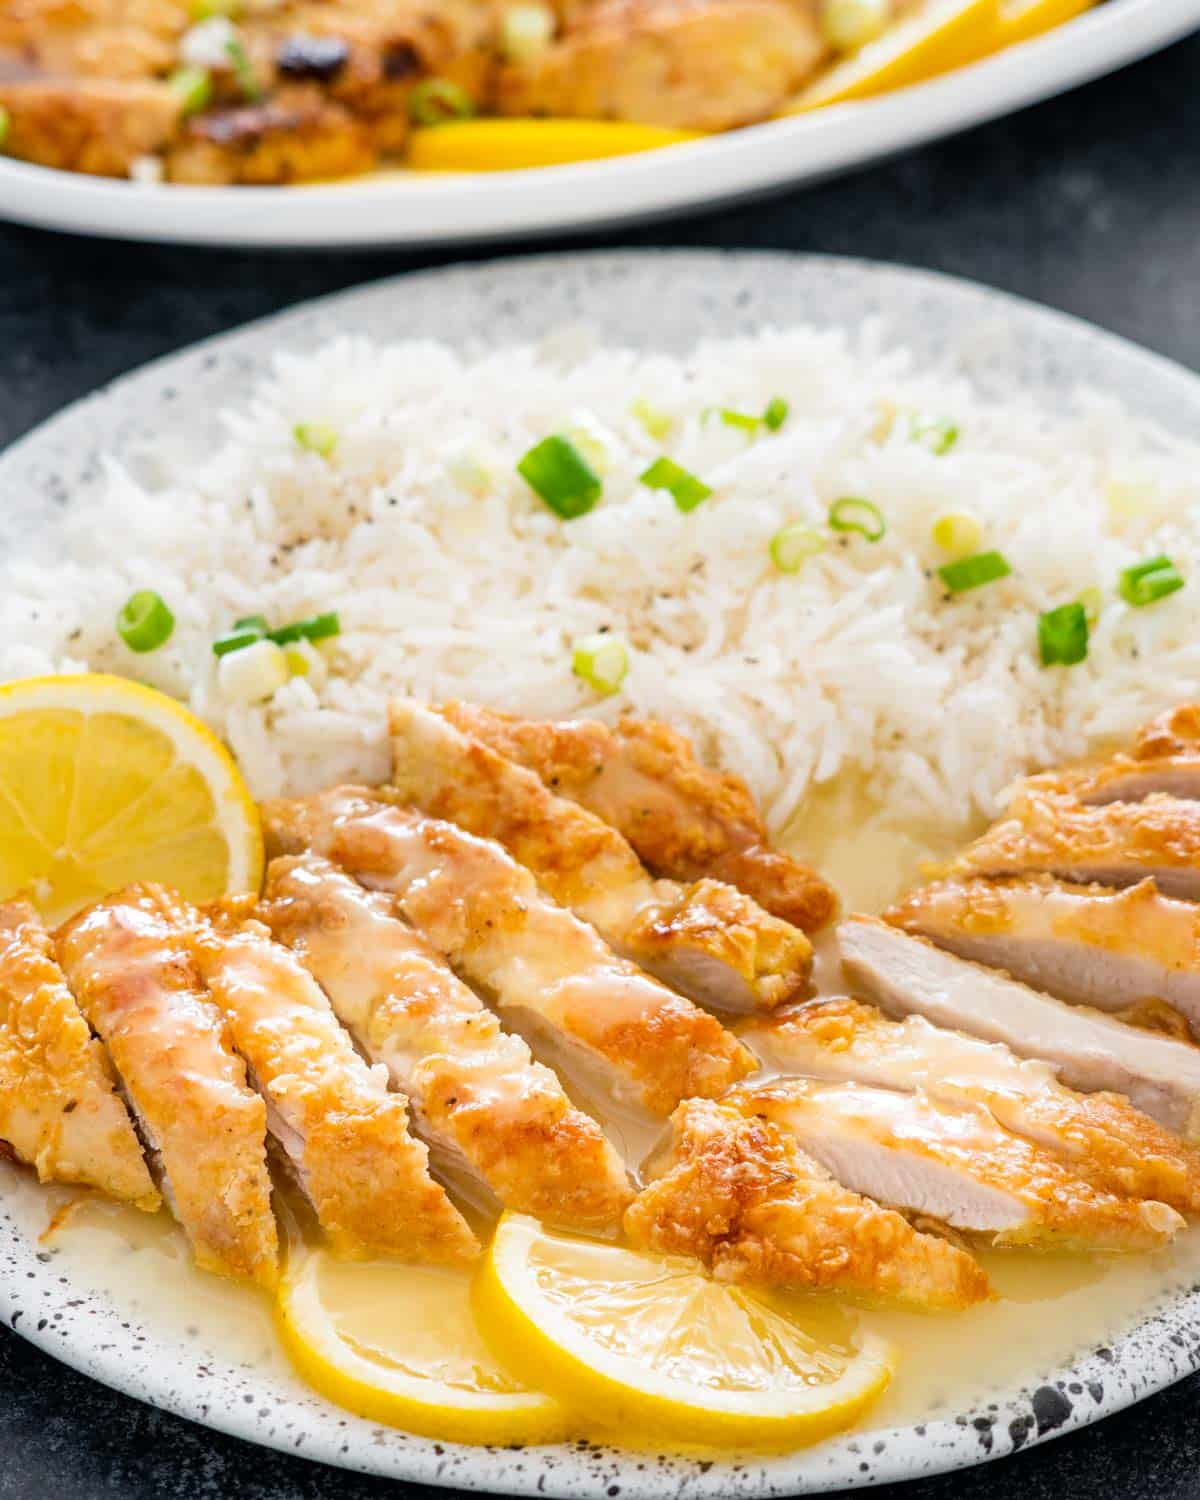 sliced up chinese lemon chicken with a side of rice and garnished with lemon slices.